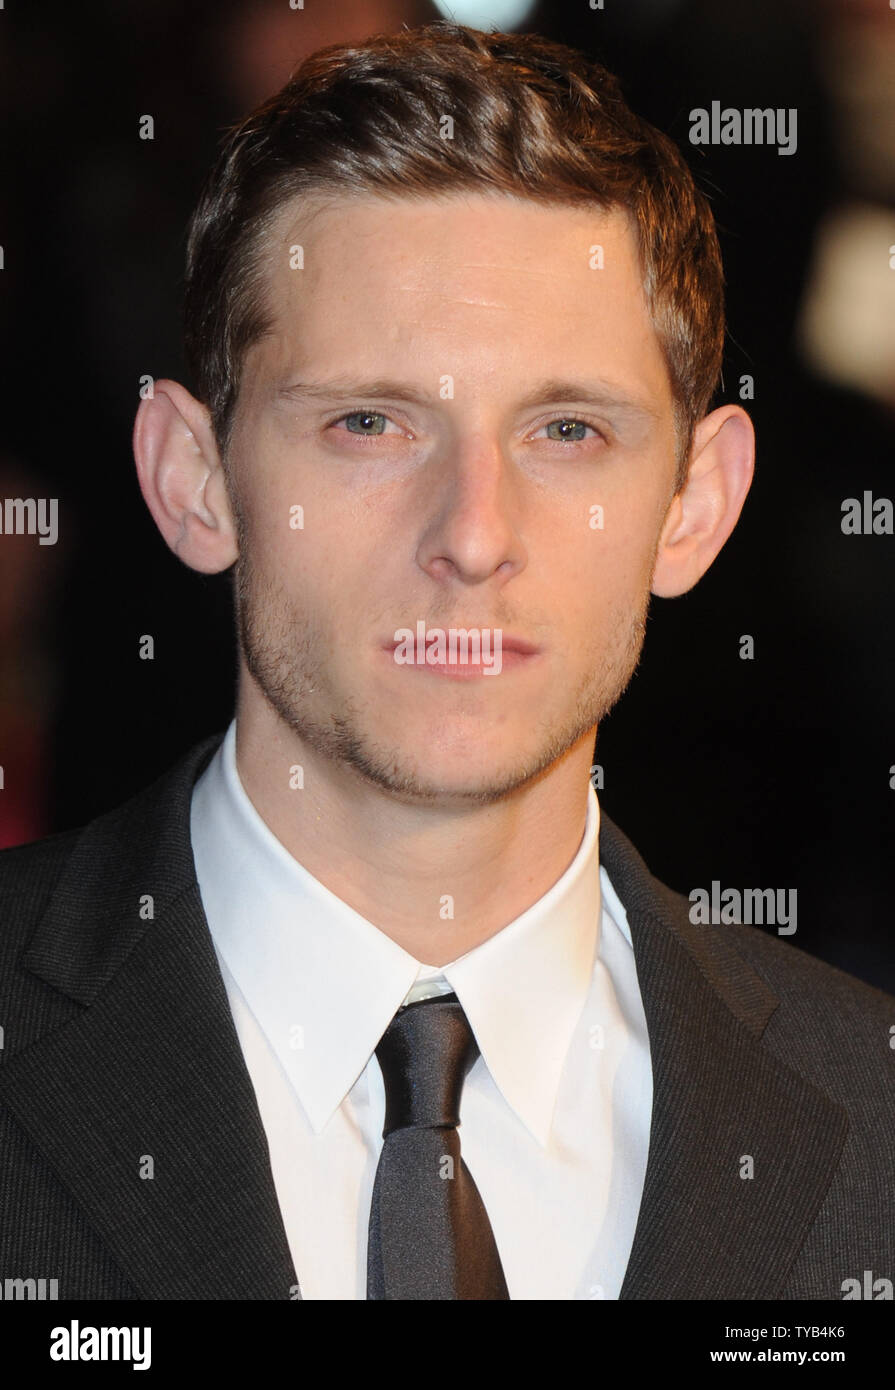 British actor Jamie Bell attends the premiere of 'The Eagle' at Empire, Leicester Square in London on March 9, 2011.     UPI/Rune Hellestad Stock Photo